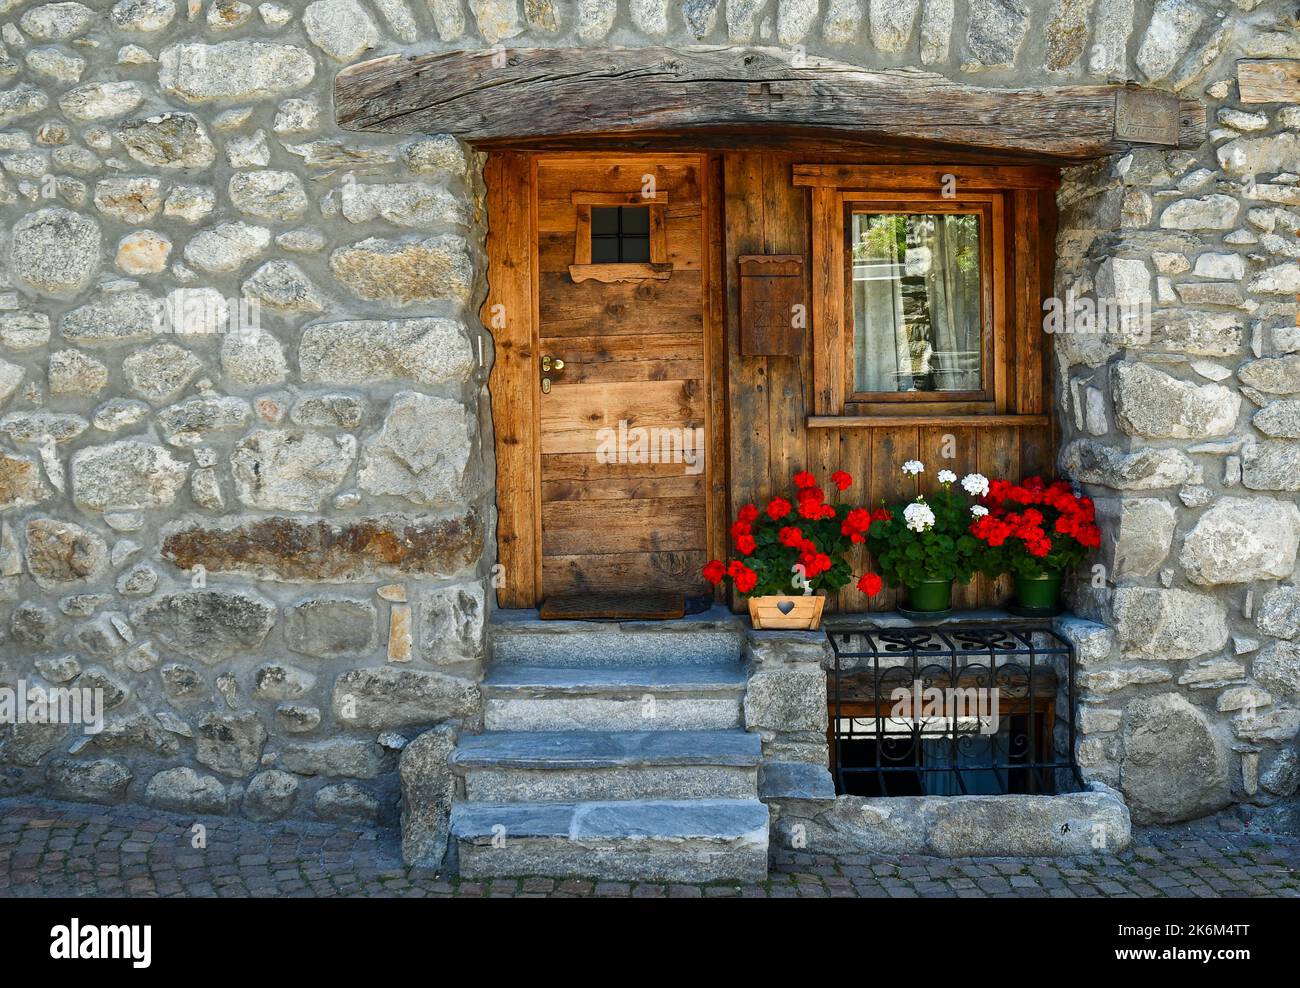 Exterior of a typical stone hut with wooden entrance door and flowering geraniums in summer, Courmayeur, Aosta Valley, Italy Stock Photo